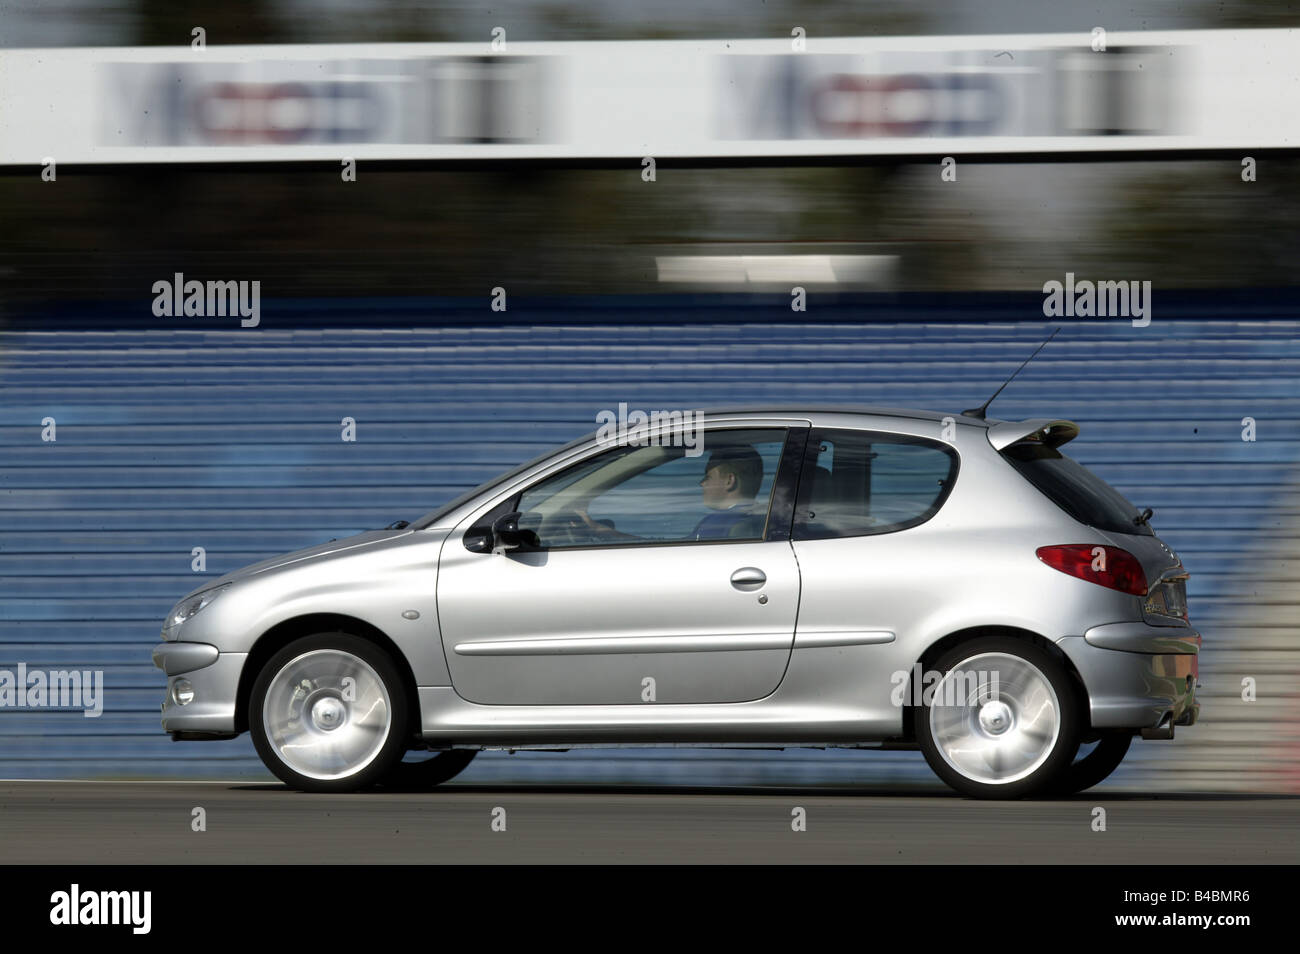 Car, Peugeot 206 RC, Limousine, small approx., model year 2003-, silver, driving, side view, Test track Stock Photo